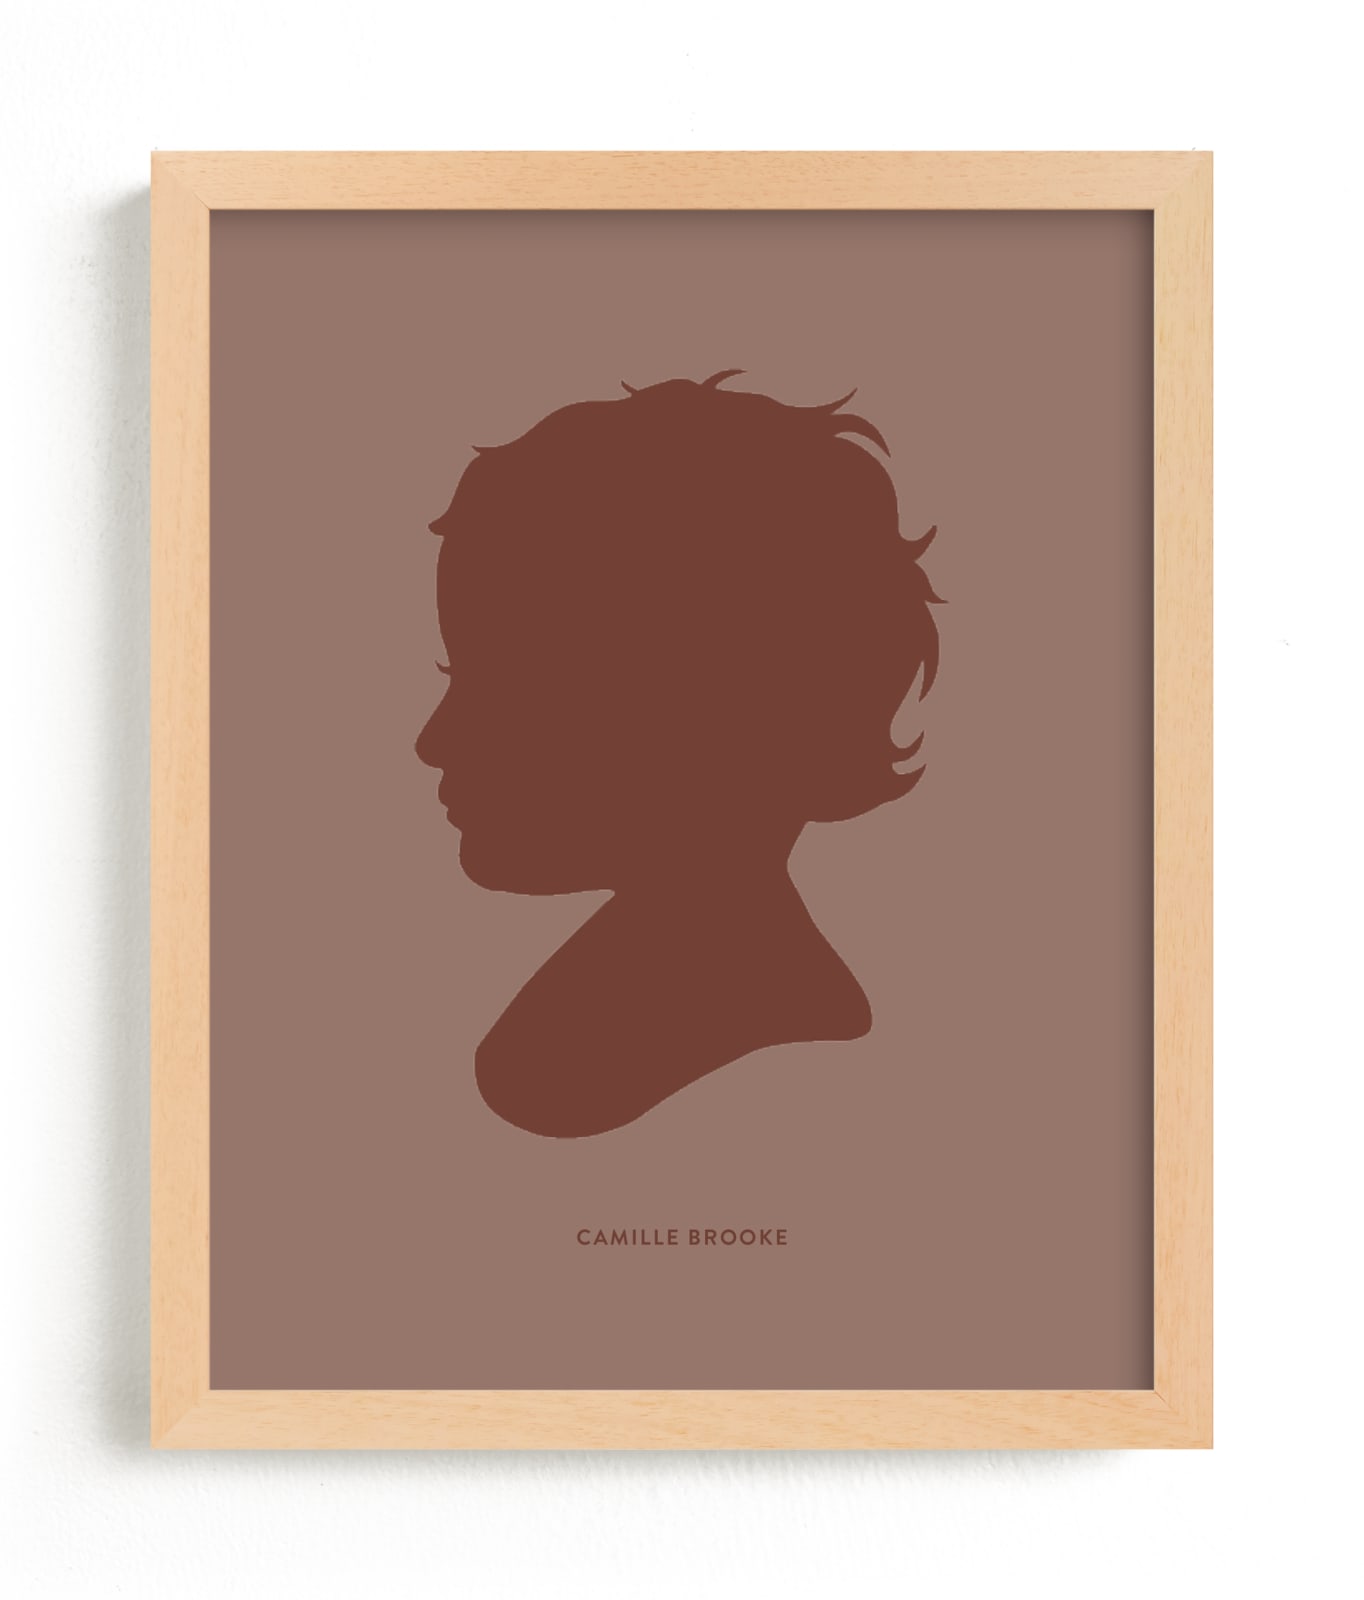 This is a colorful silhouette art by Minted called Tone on Tone Silhouette.